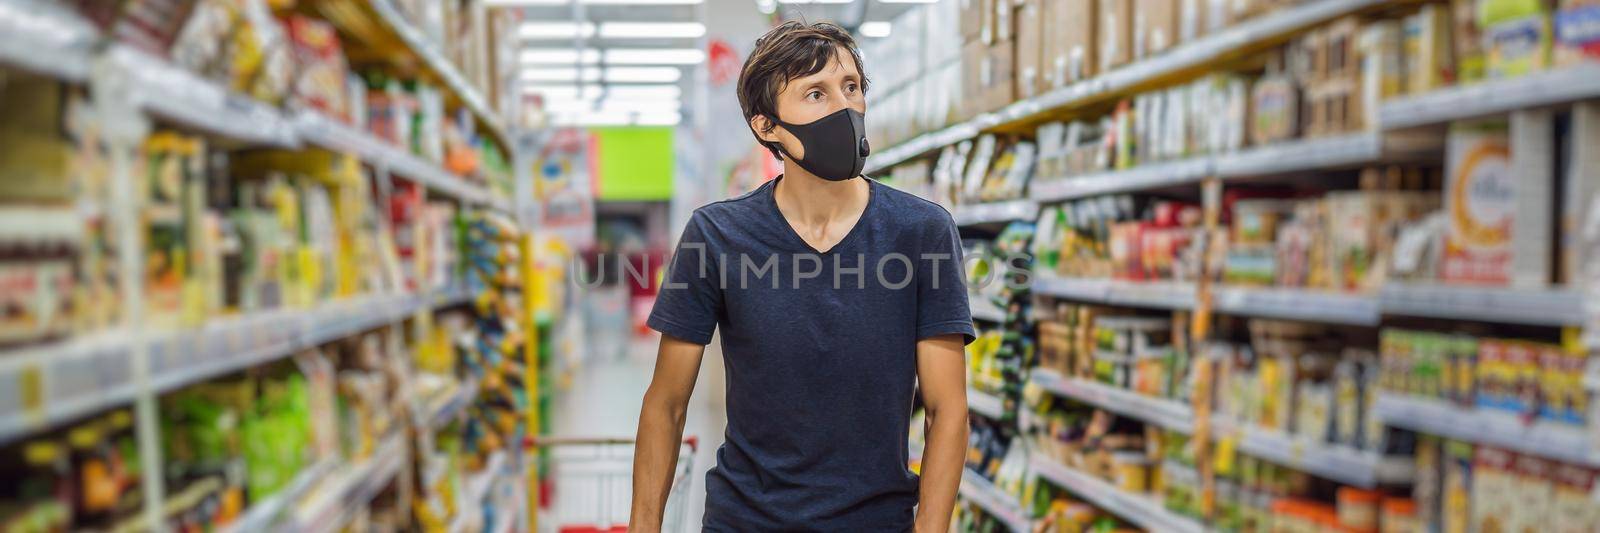 Alarmed man wears medical mask against coronavirus while grocery shopping in supermarket or store- health, safety and pandemic concept - young woman wearing protective mask and stockpiling food BANNER, LONG FORMAT by galitskaya